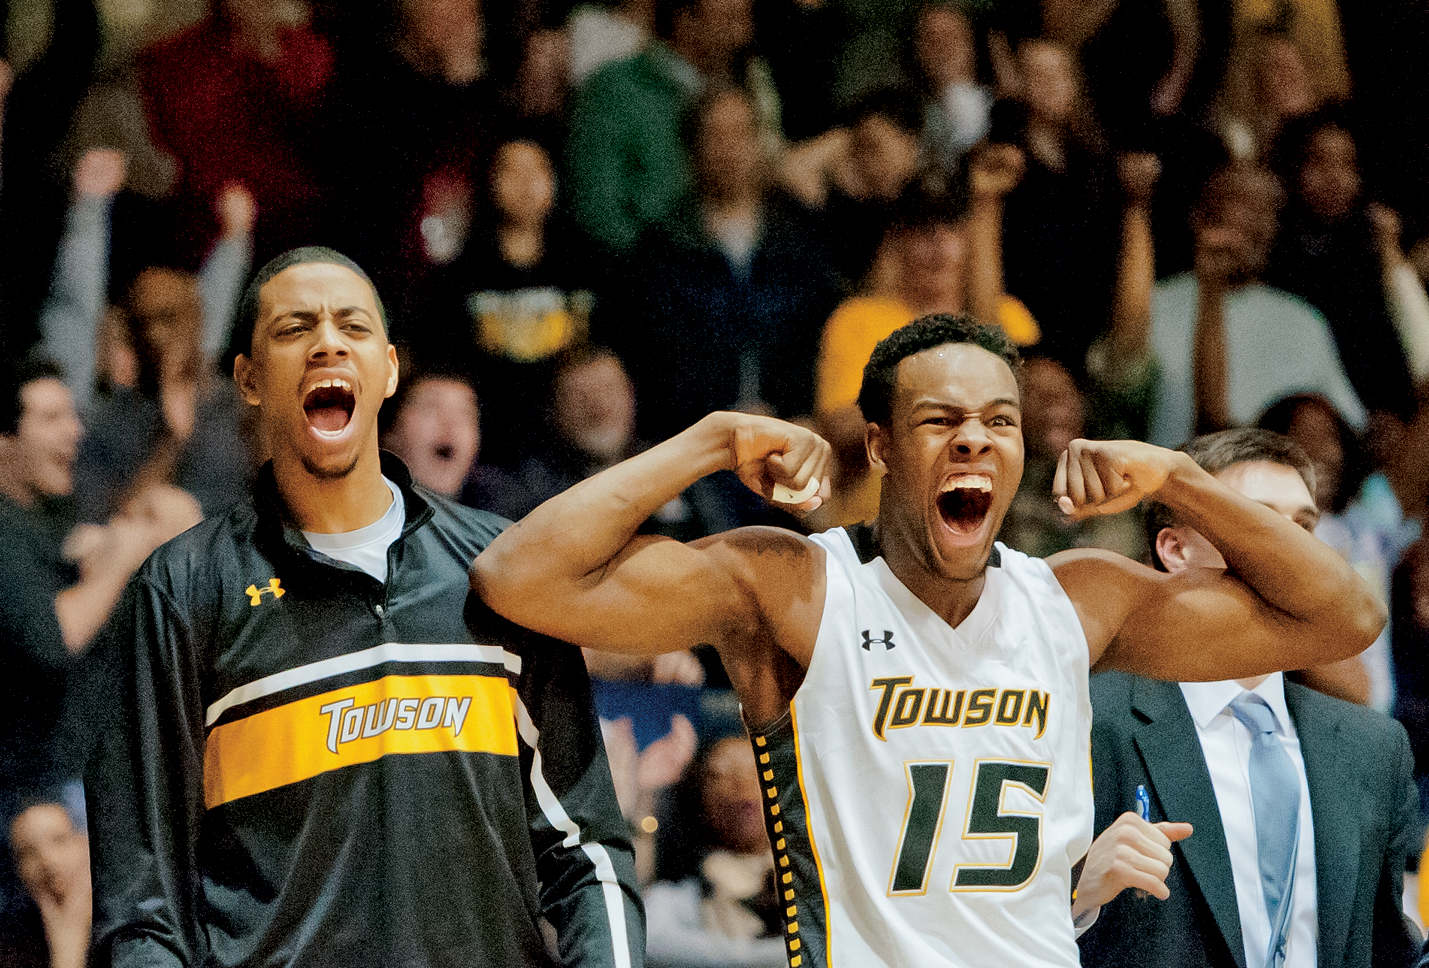  Towson University men's basketball players Jamel Flash and Timajh Parker-Rivera cheer as they win their final game against Hofstra University on March 2, 2013 in Baltimore, Md. This game broke the NCAA record for biggest turn around from a previous 